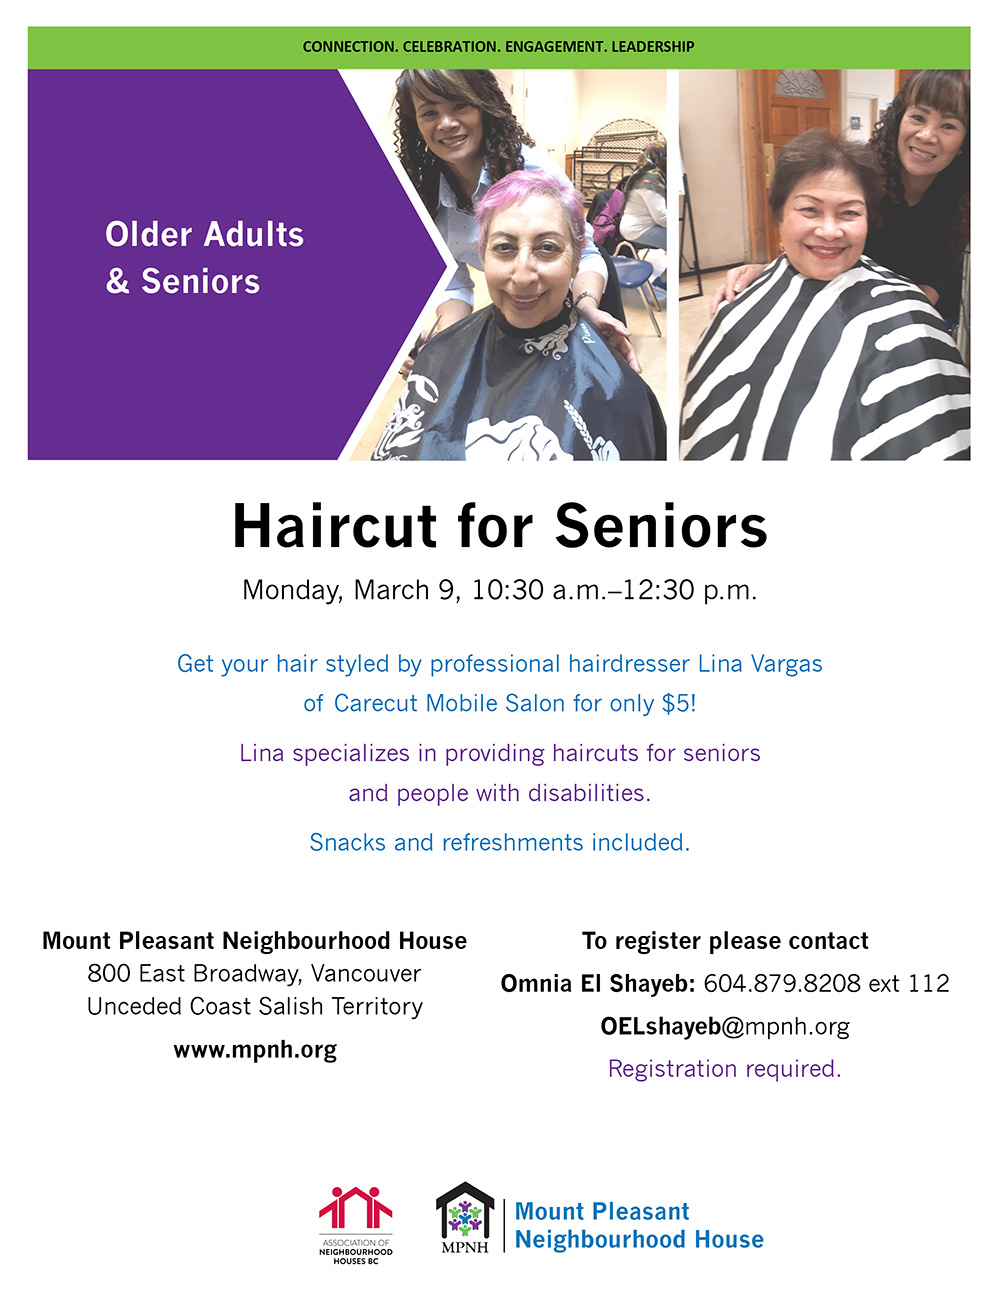 Poster for haircut for seniors showing two smiling senior ladies happy with their new haircuts